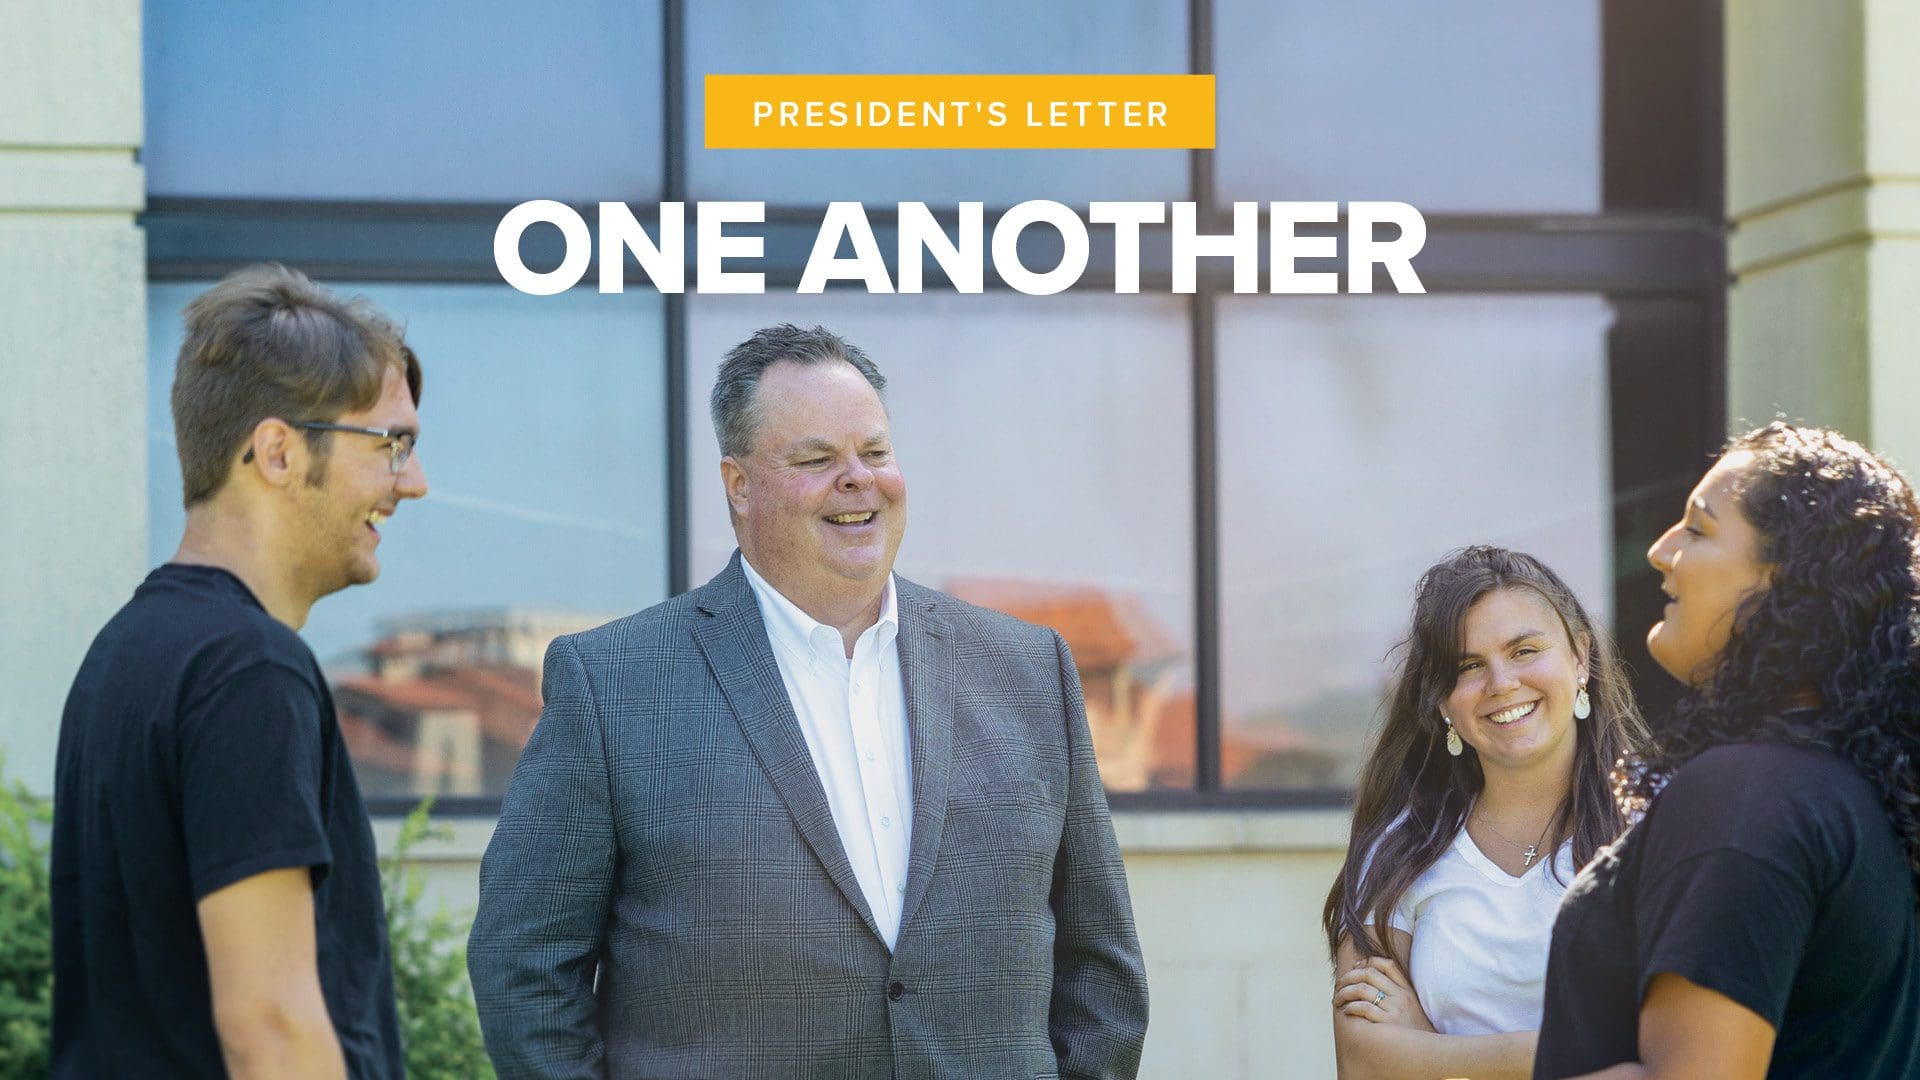 President's Letter: One Another